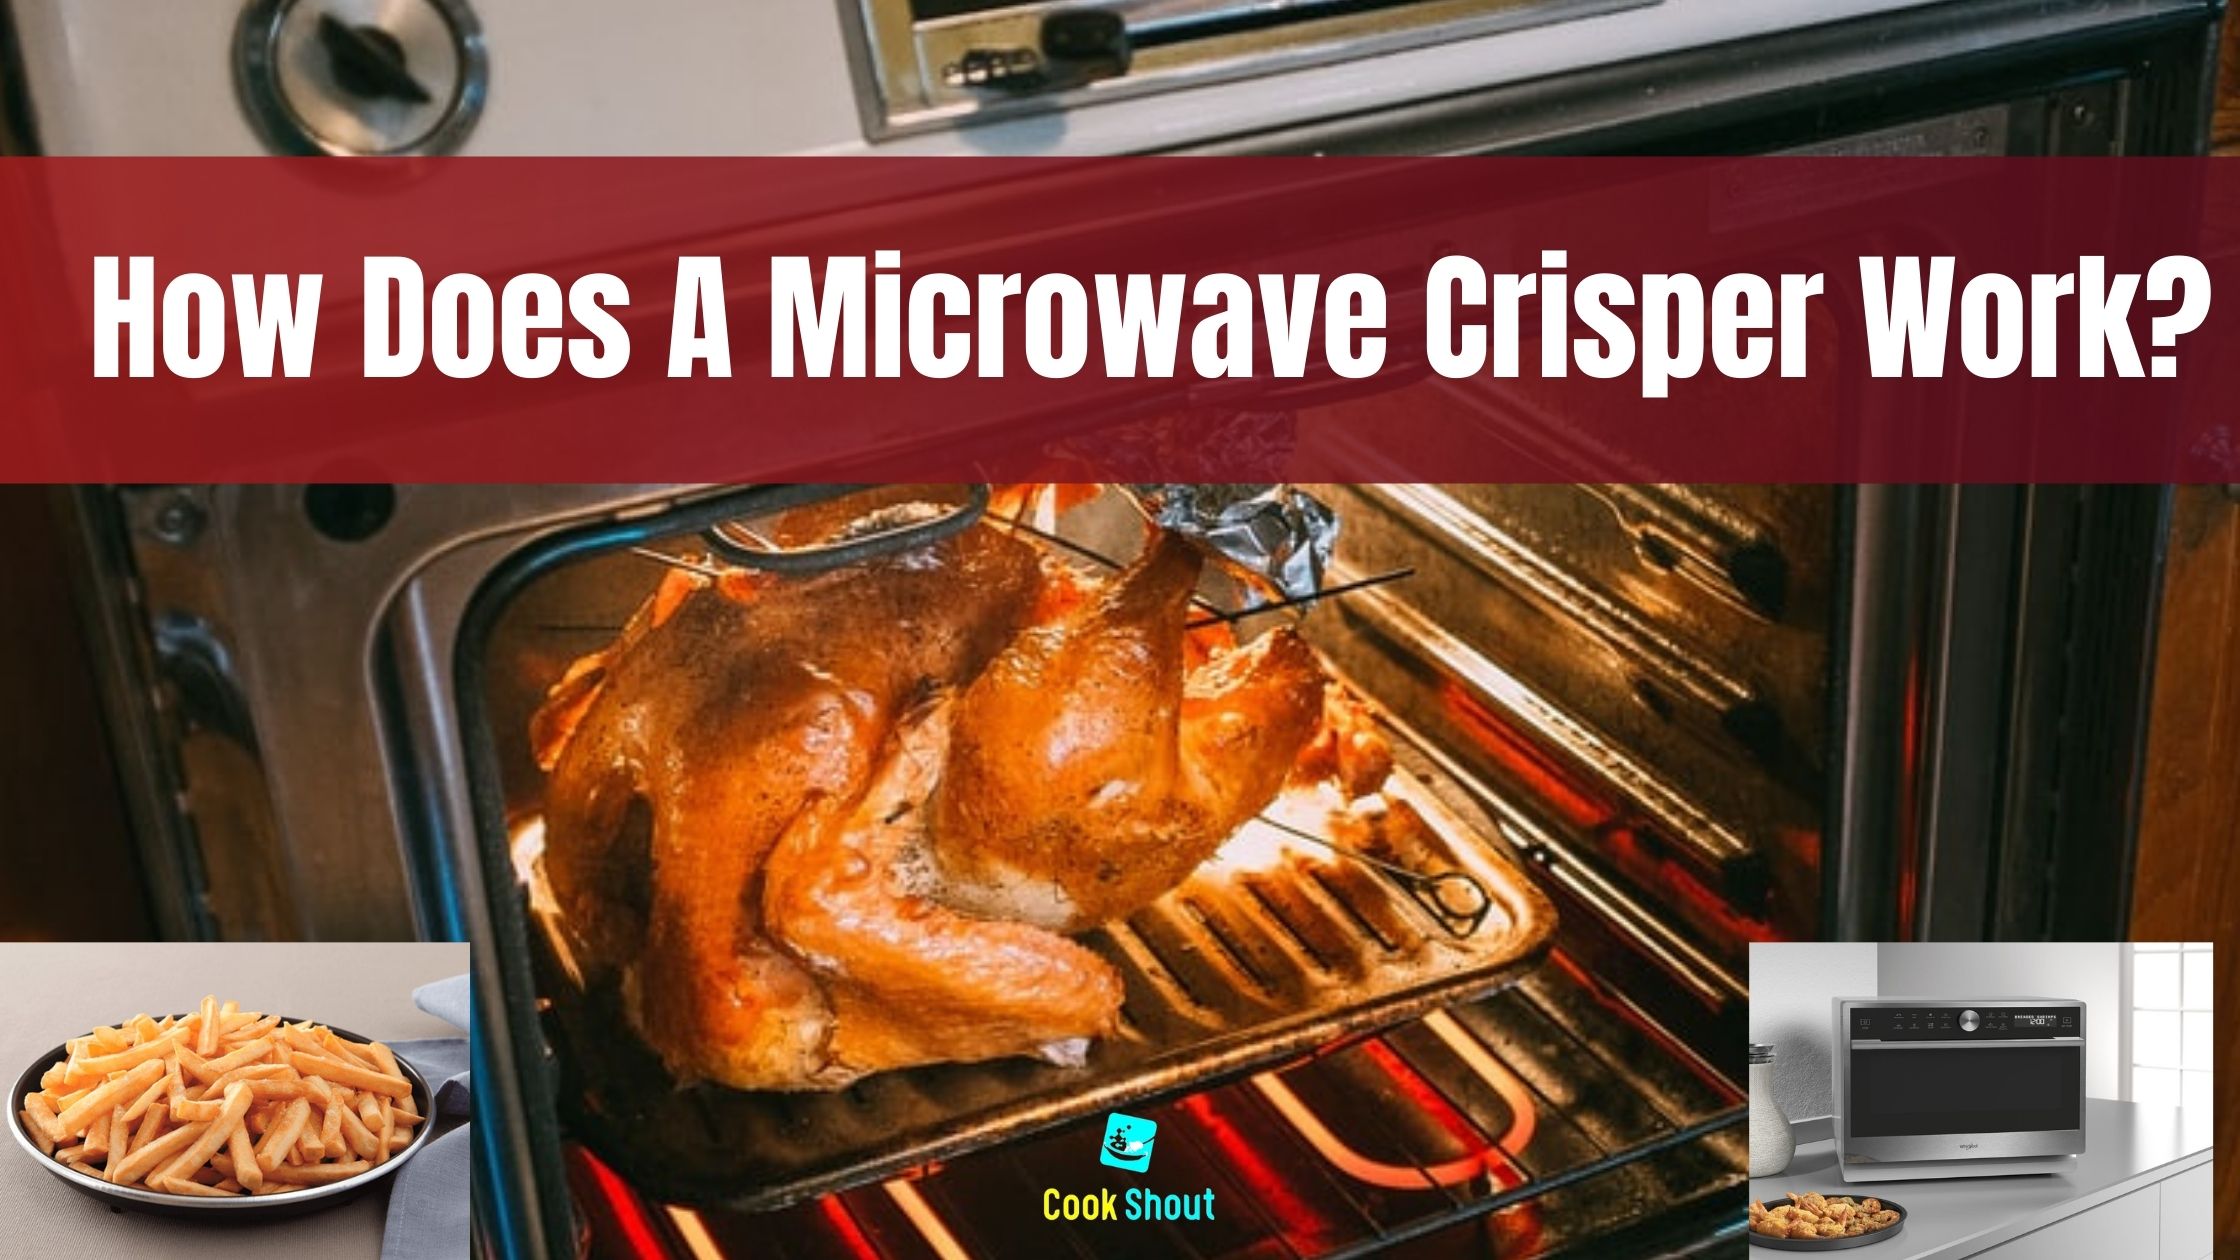 How Does A Microwave Crisper Work?